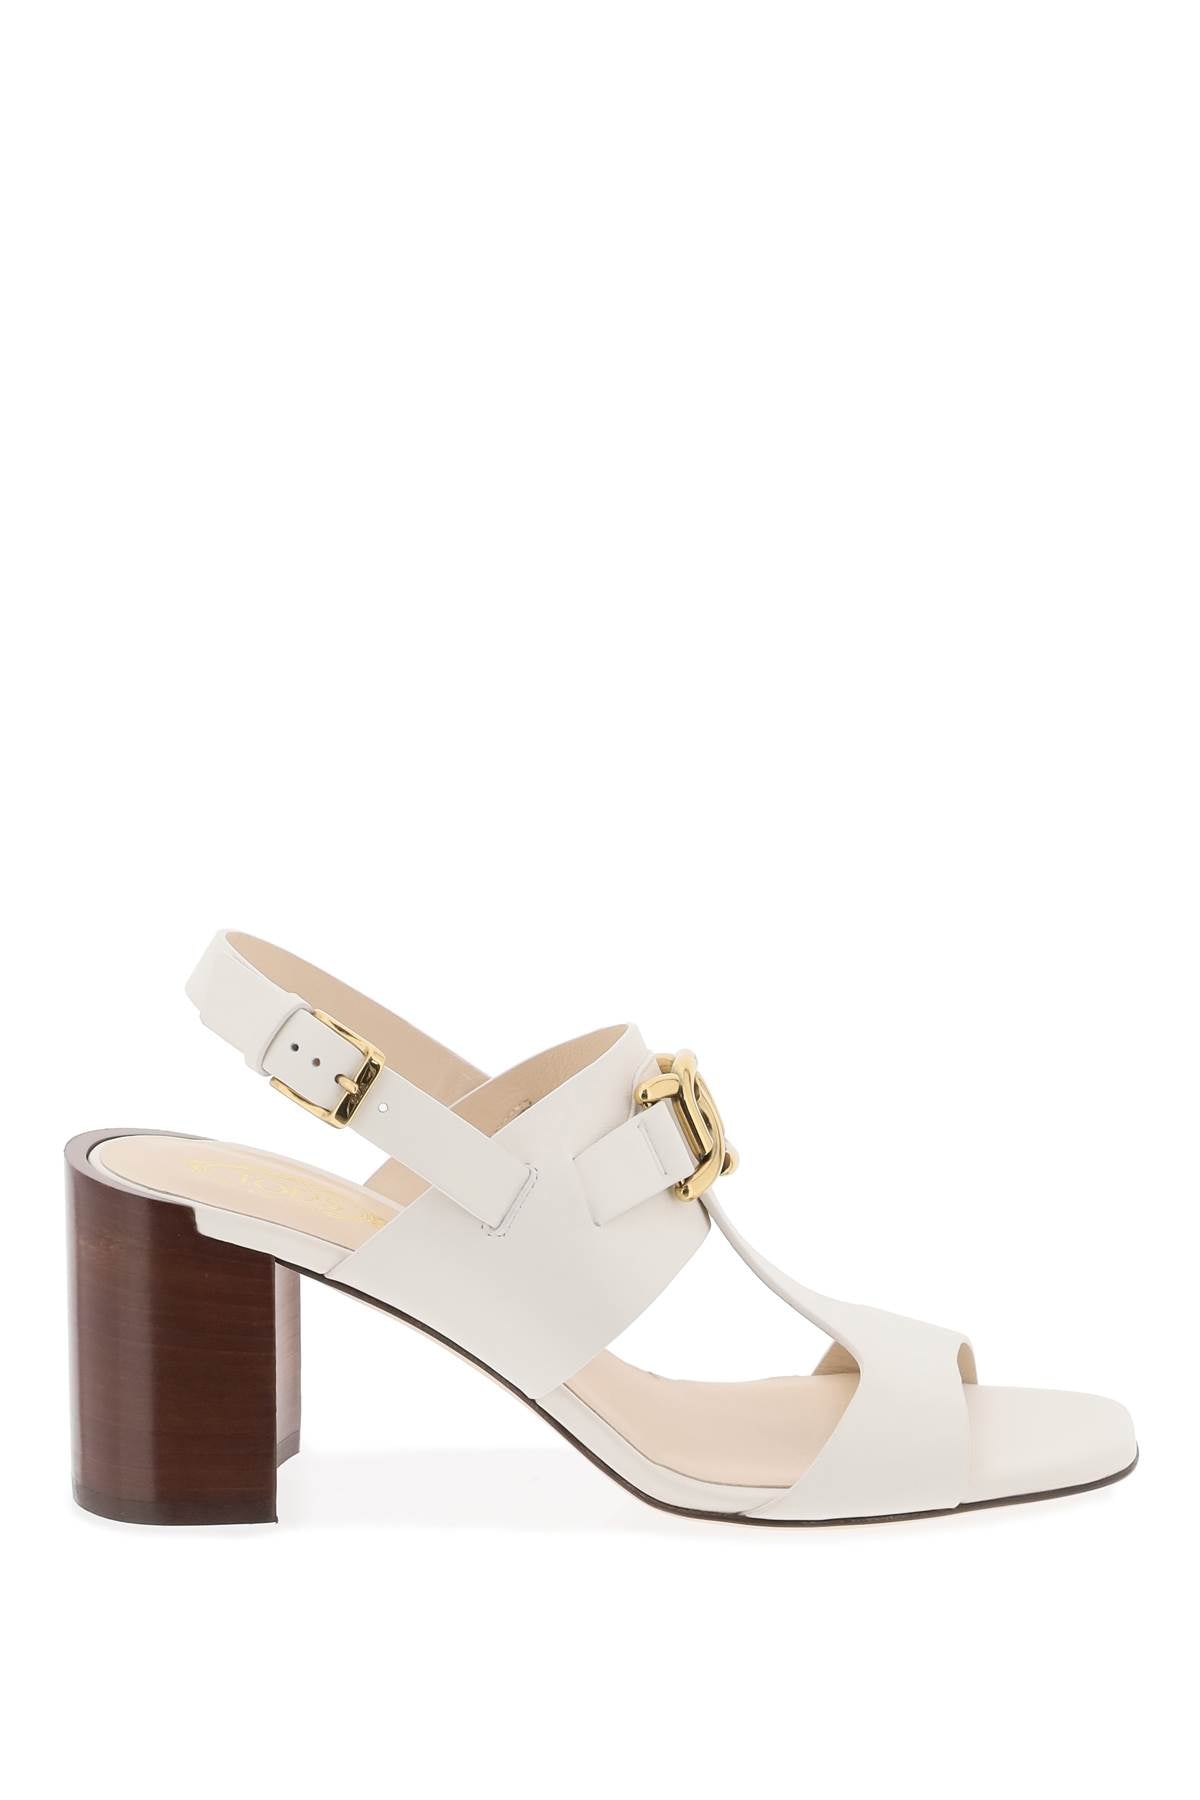 Tod's kate sandals-women > shoes > sandals-Tod'S-Urbanheer